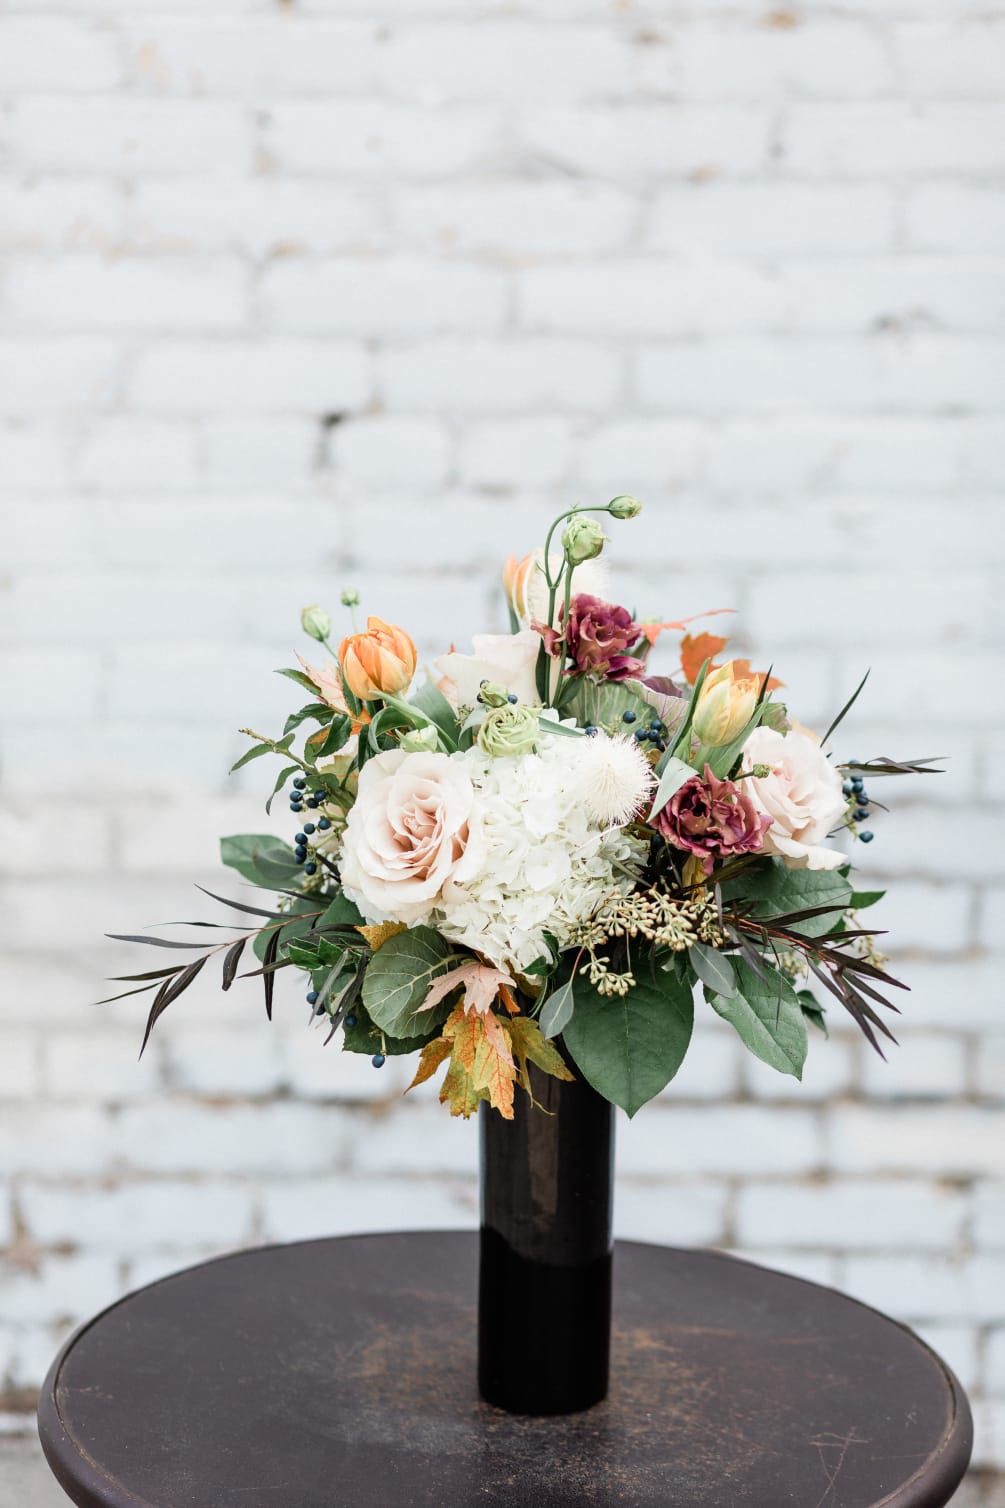 Stunning mix of fall blooms with touches of purples, oranges, and other